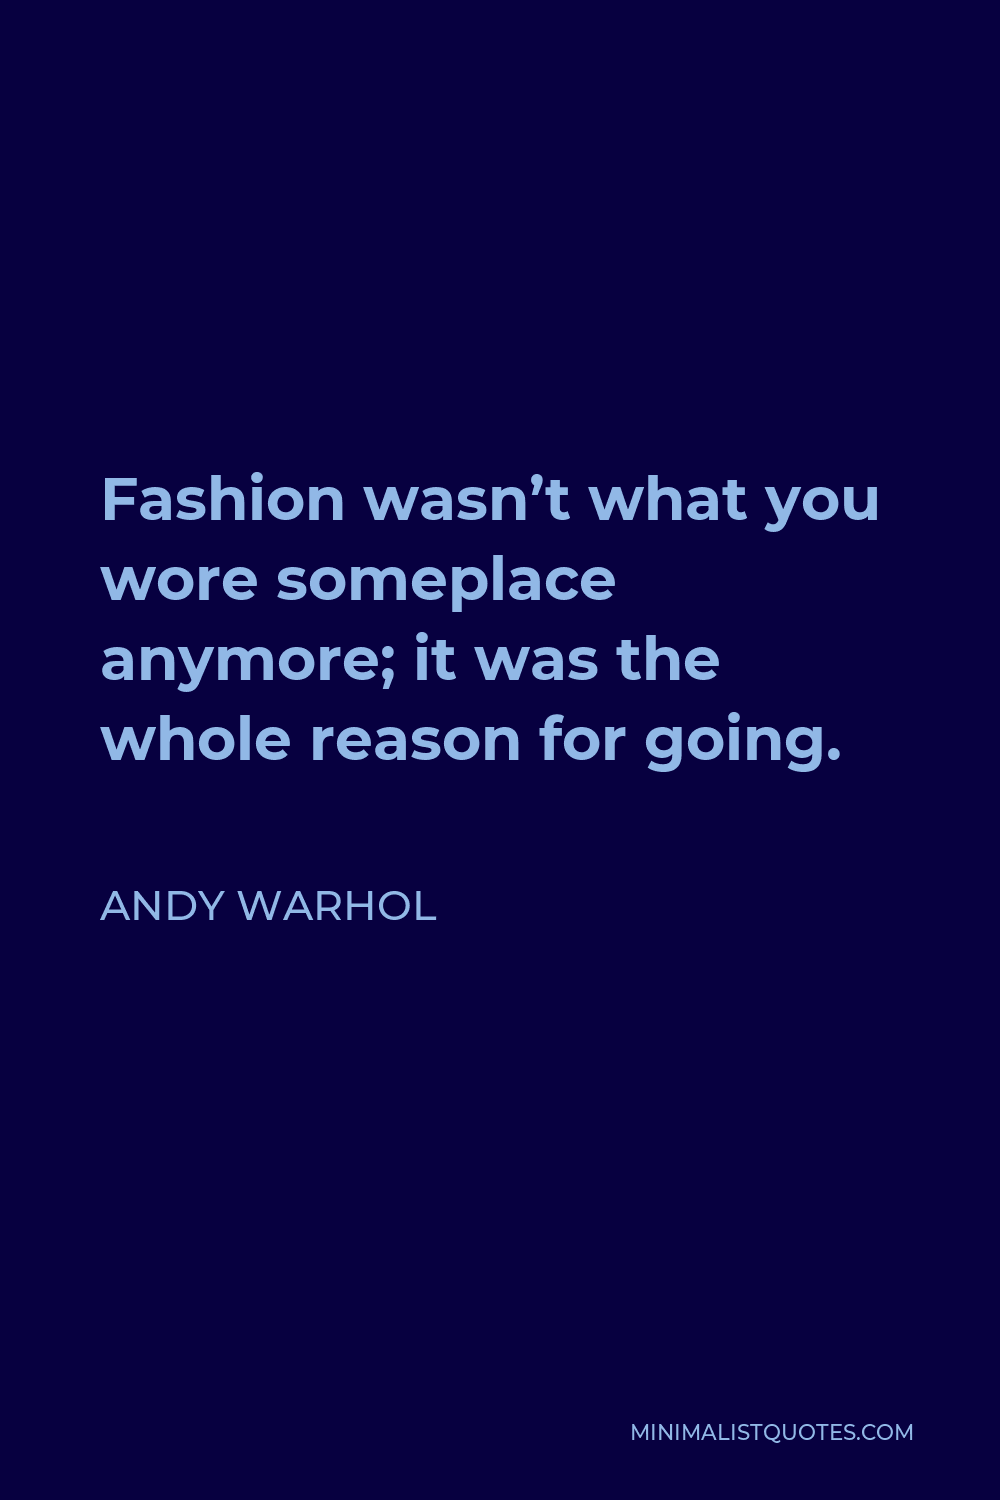 Andy Warhol Quote - Fashion wasn’t what you wore someplace anymore; it was the whole reason for going.